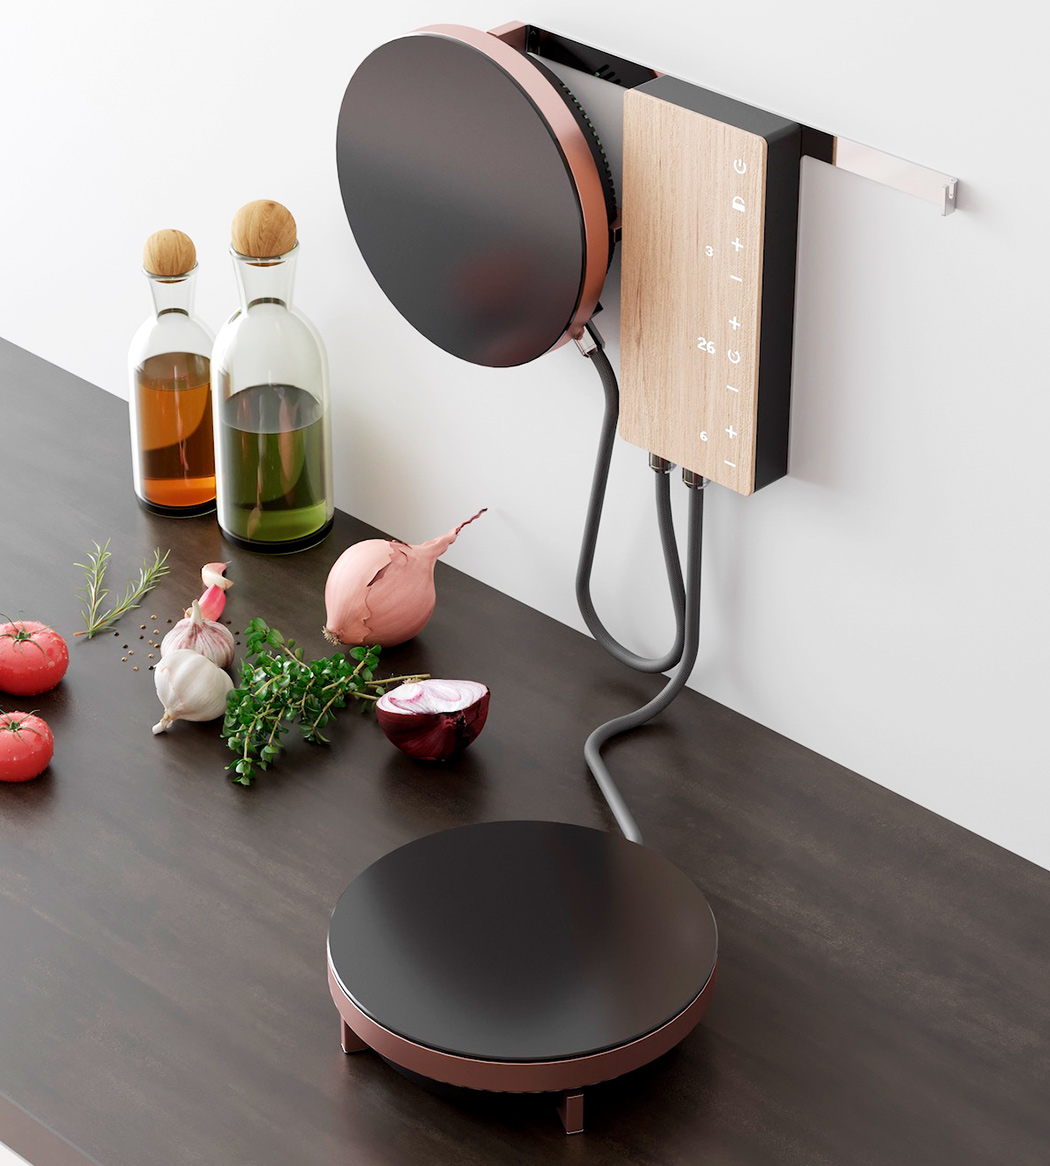 Kitchenware Designs to simplify and speed up your cooking process ...